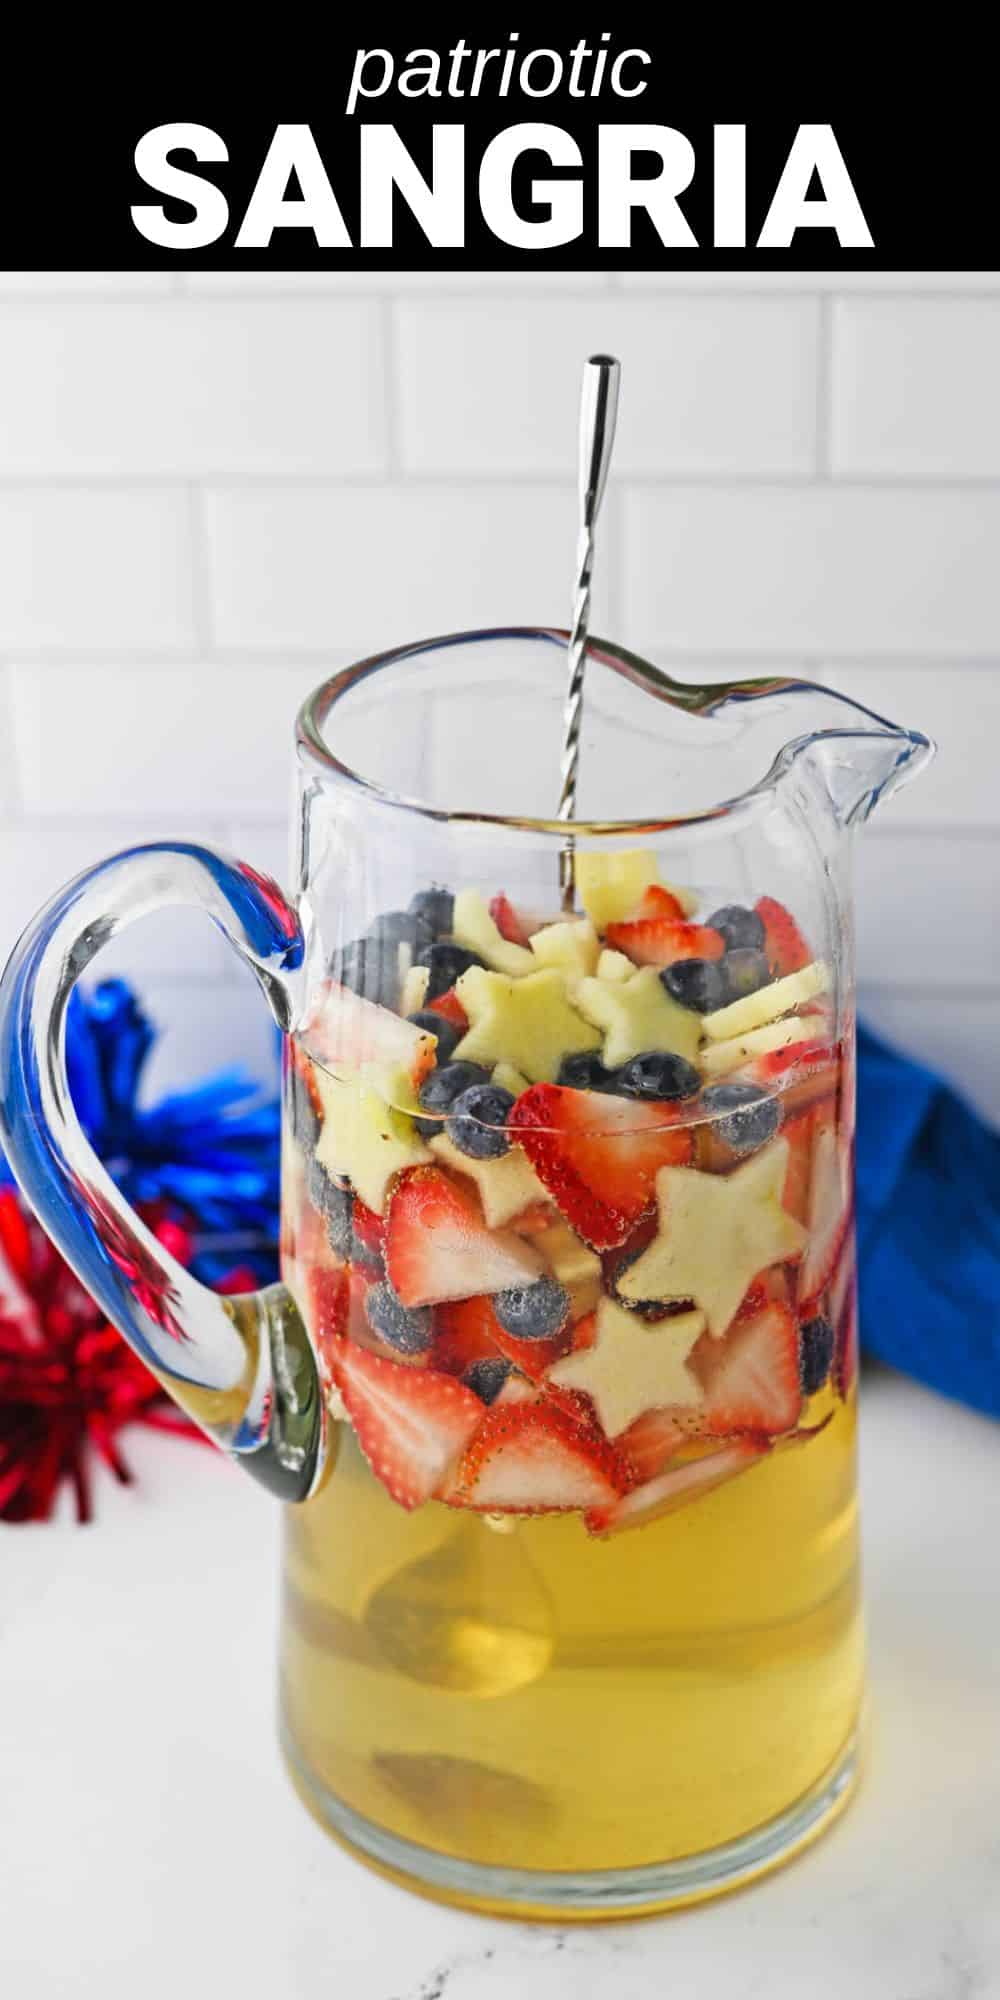 This patriotic red, white, and blue sangria is an incredibly easy and festive cocktail. Delicious, refreshing, and ready in minutes, this drink is one that you’ll enjoy serving at your Fourth of July party and all summer long.